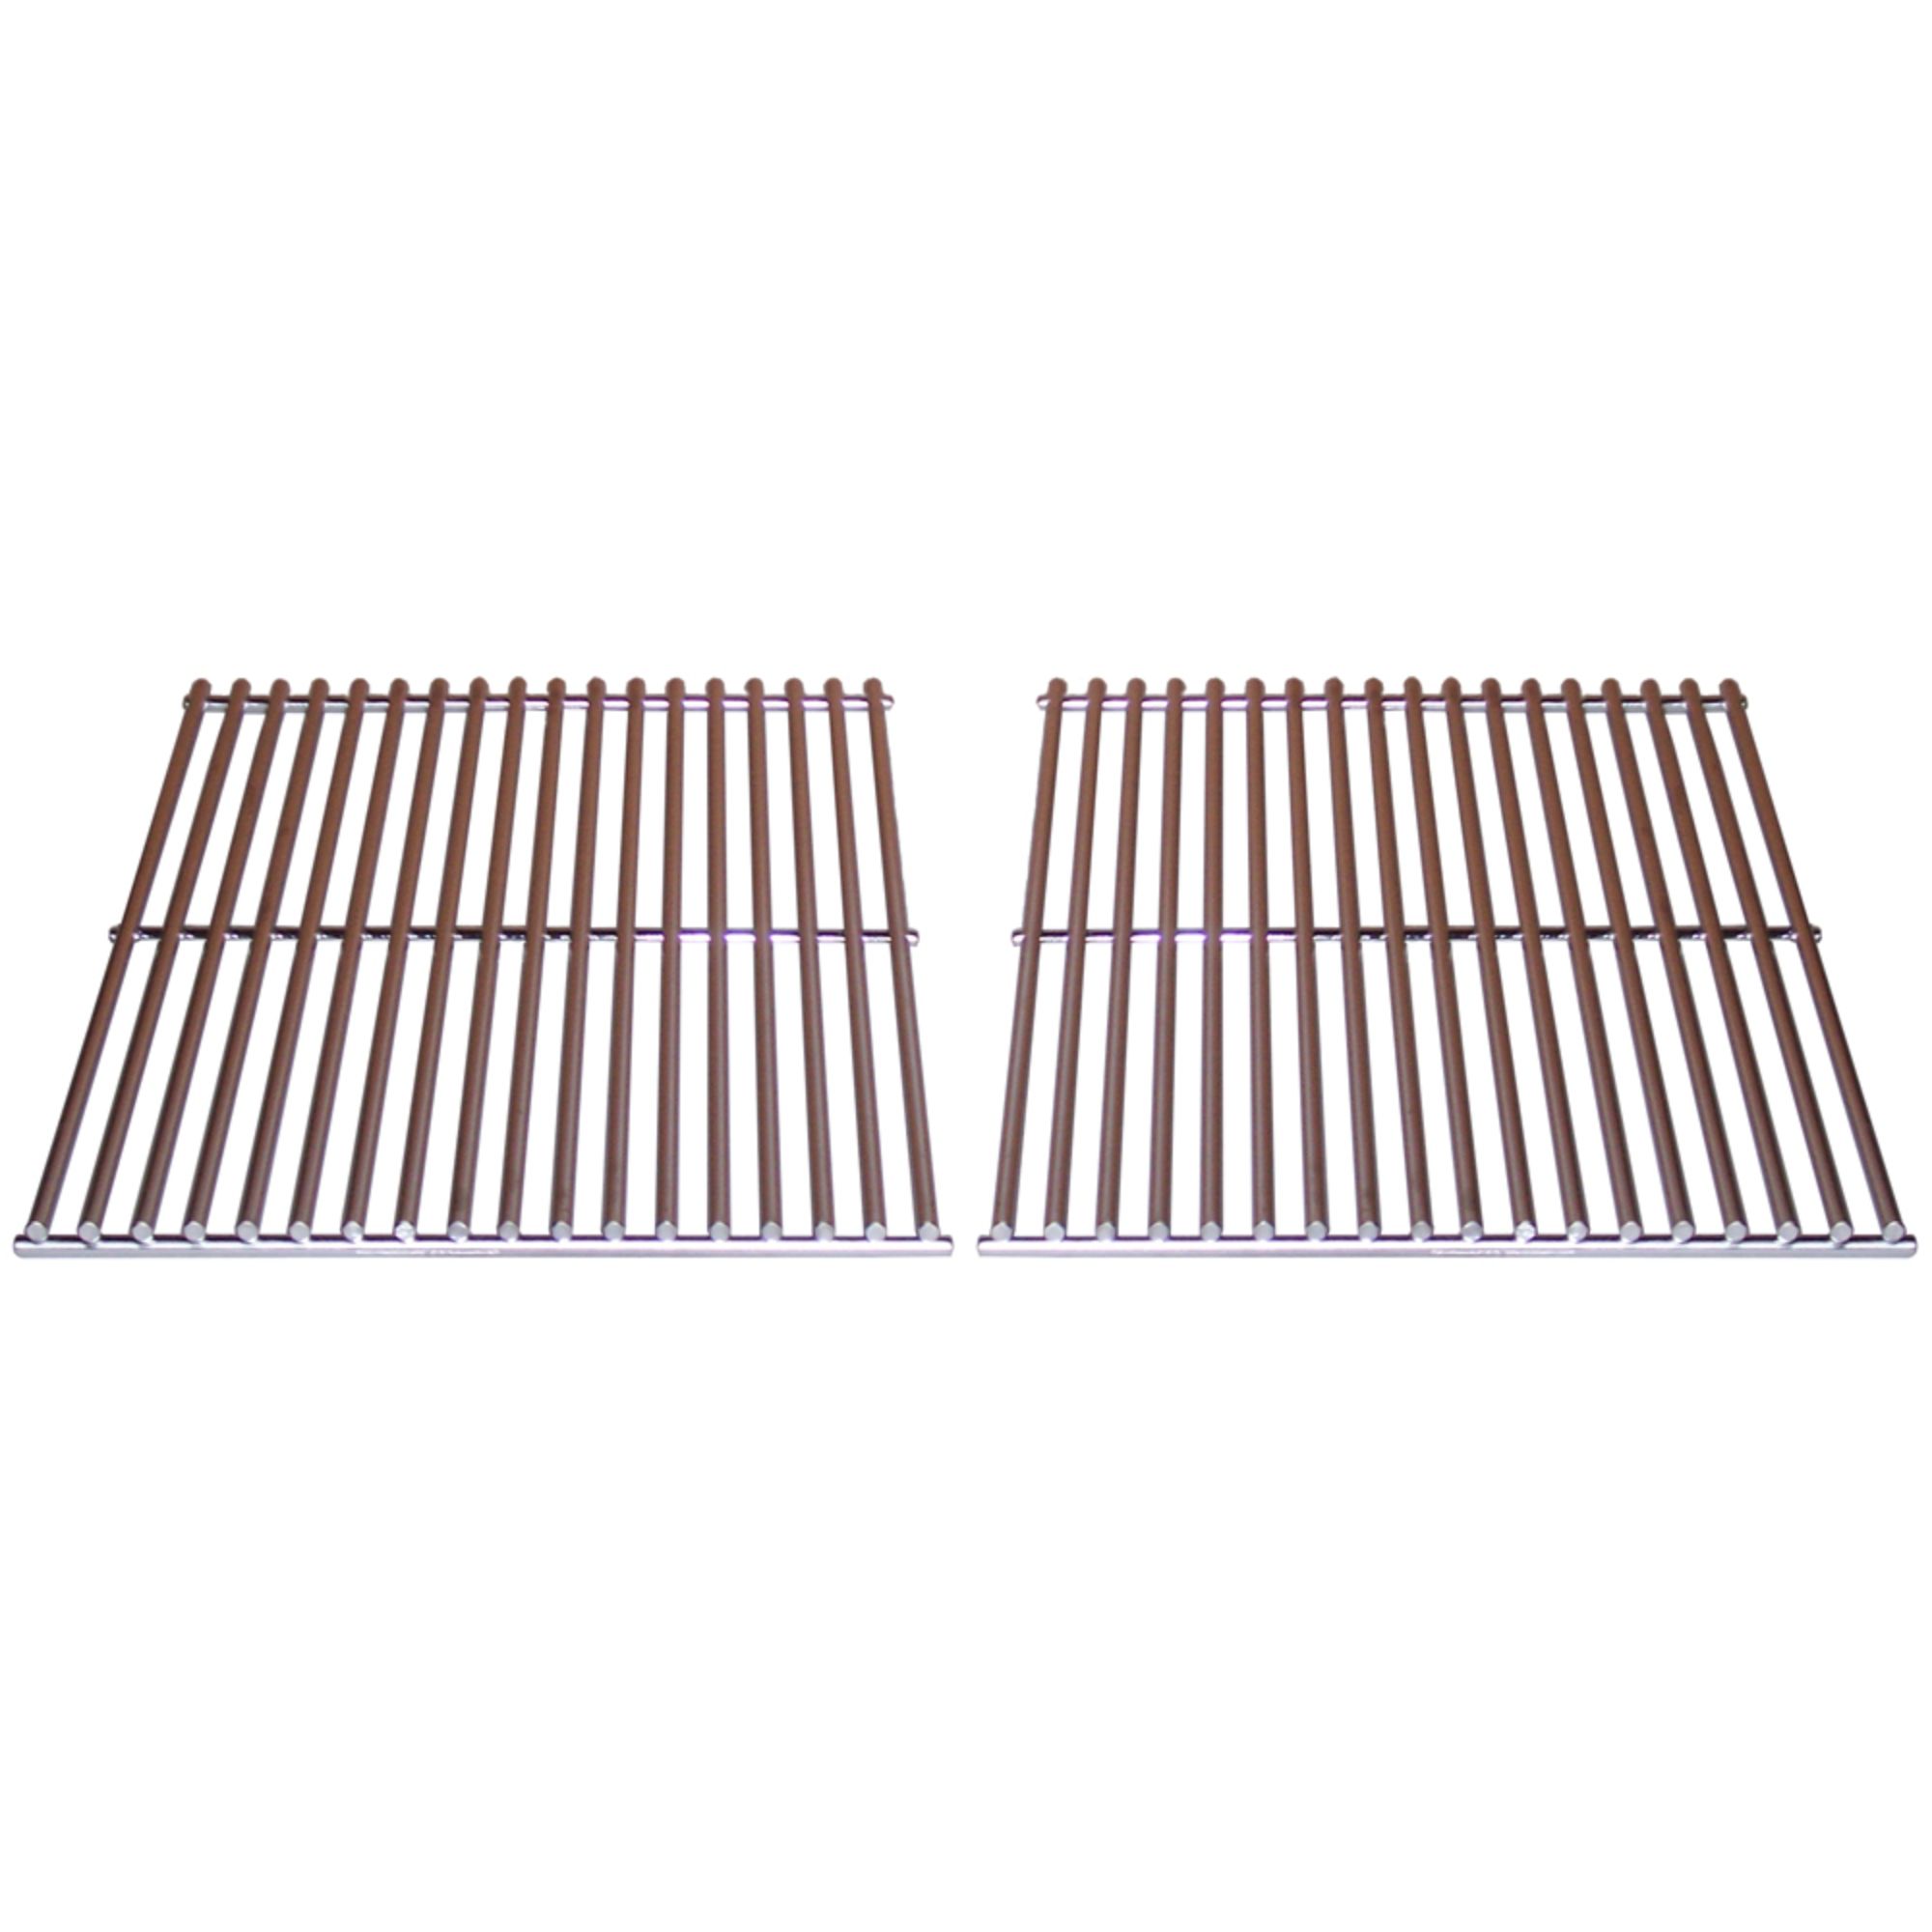 Stainless steel wire 2-pc cooking grid set for Brinkmann, Charmglow, Nexgrill, Turbo brand gas grills